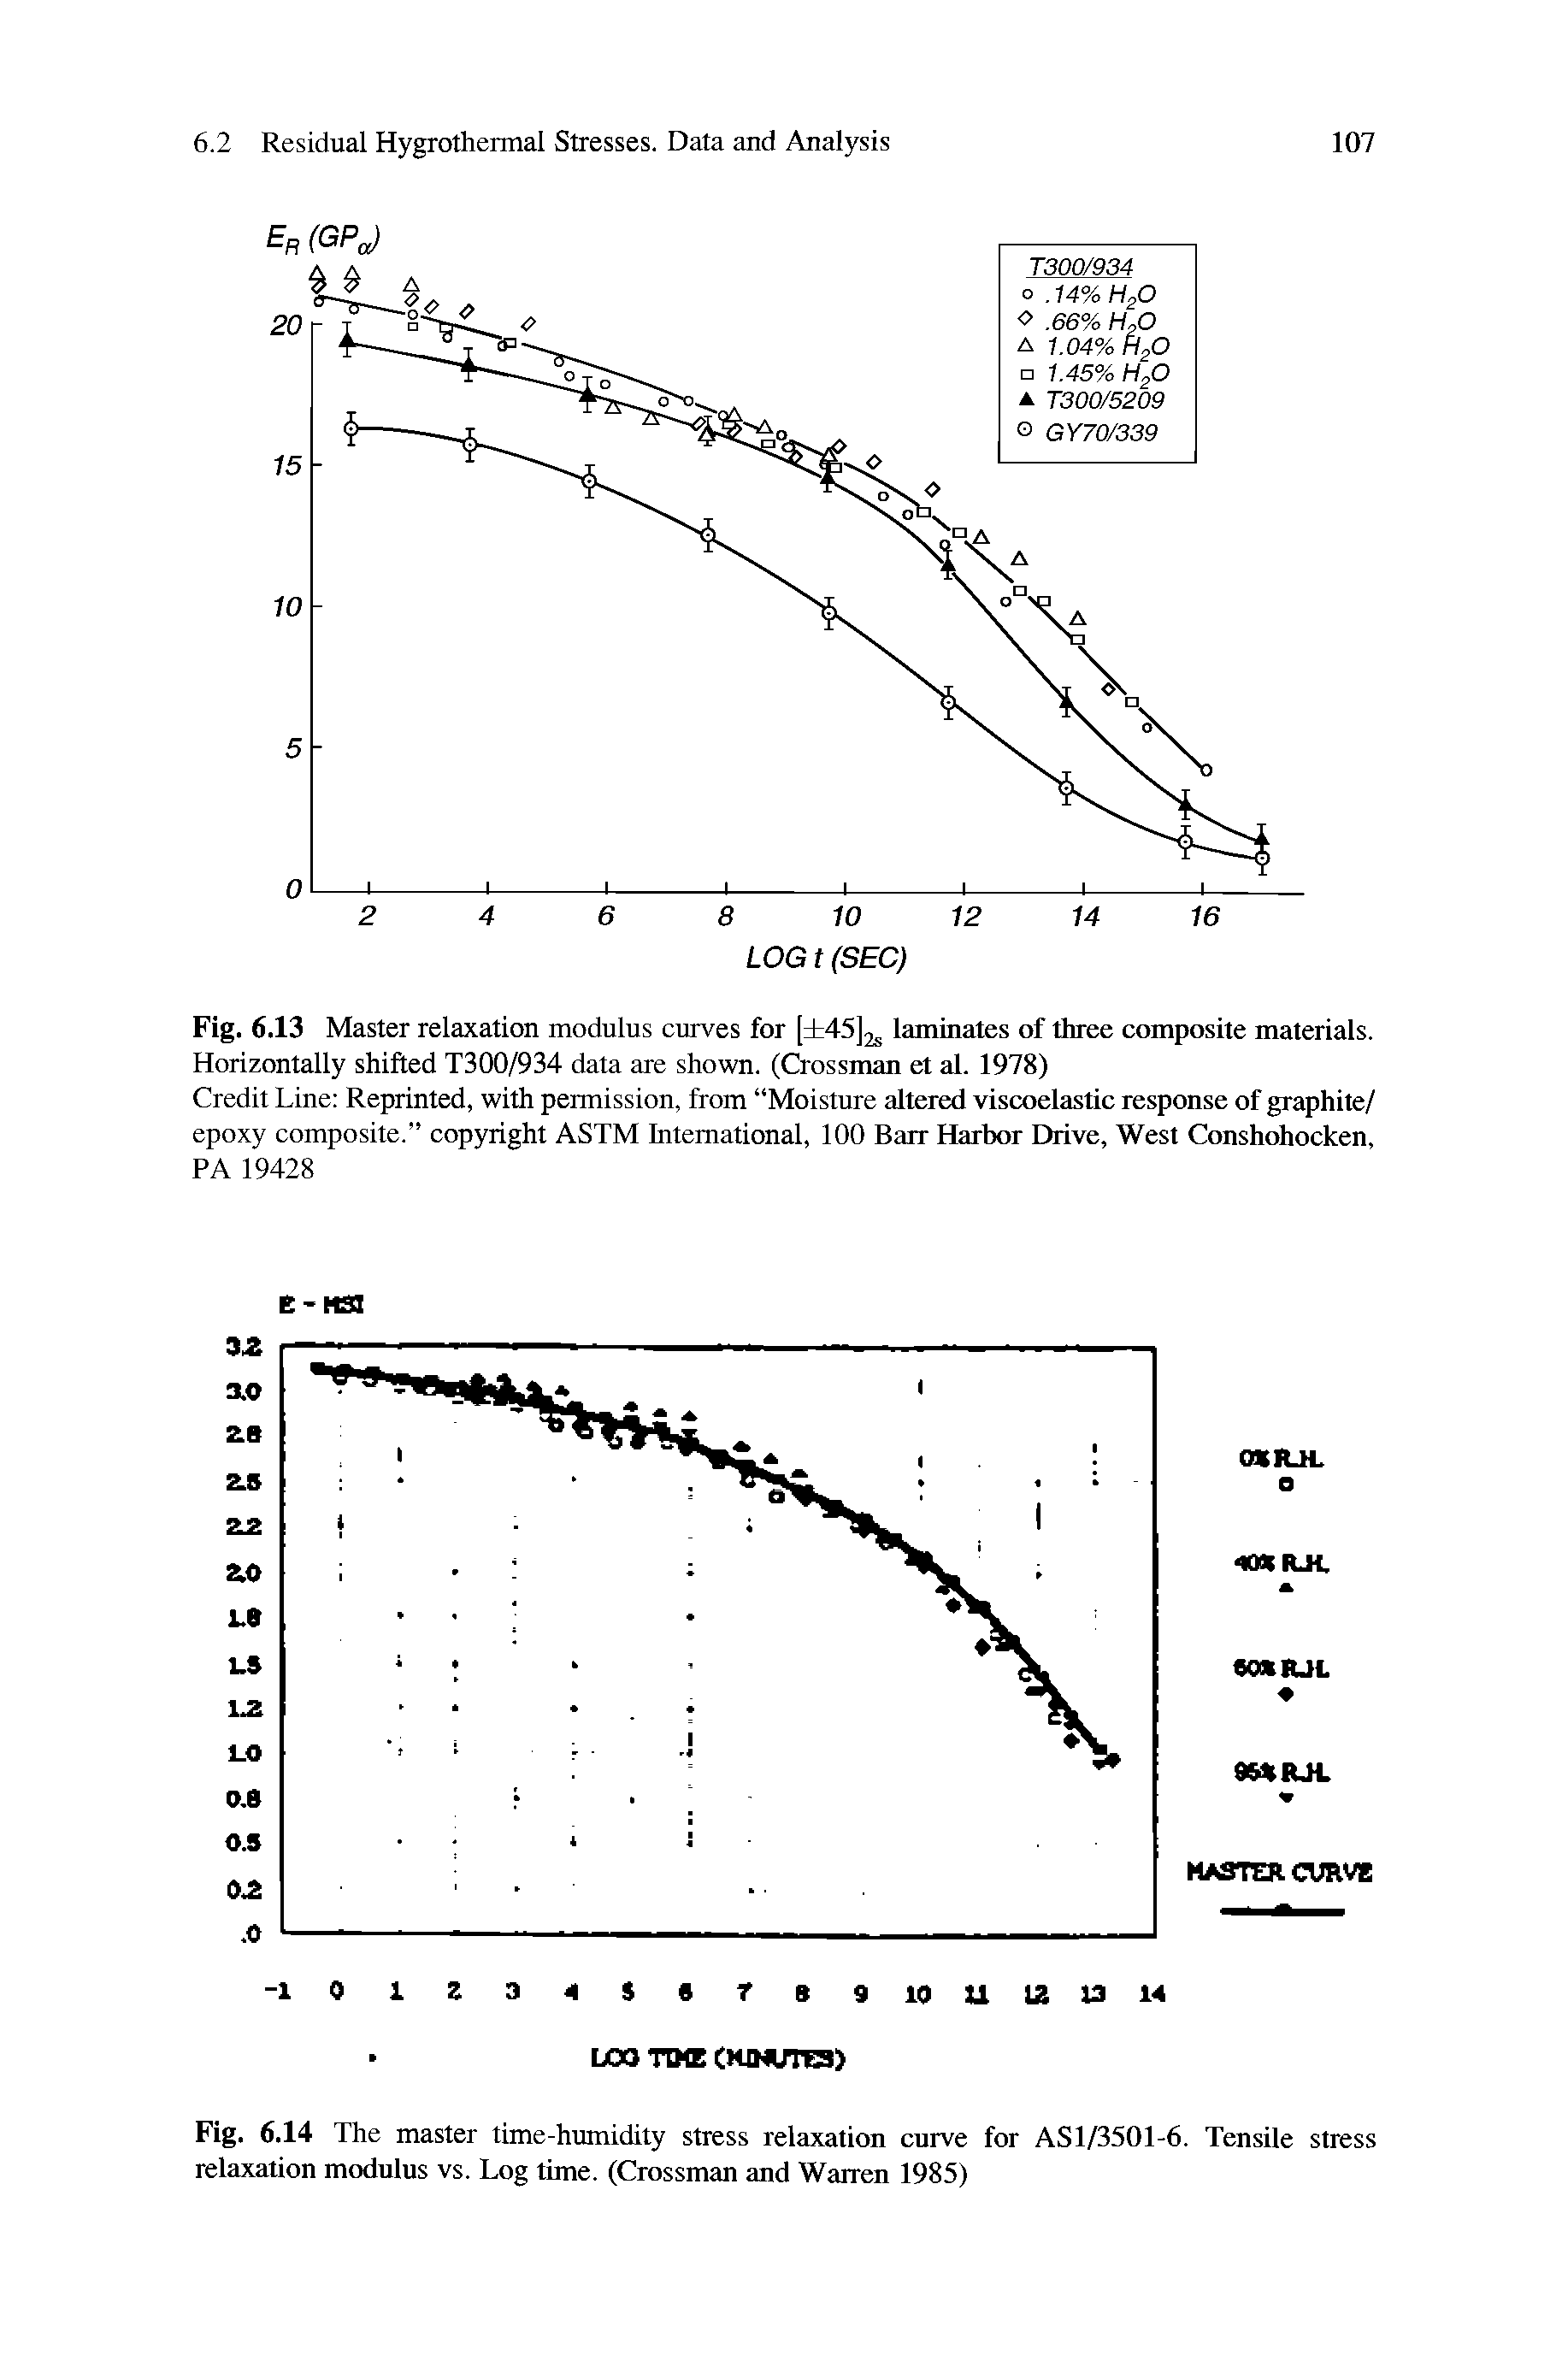 Fig. 6.14 The master time-humidity stress relaxation curve for ASl/3501-6. Tensile stress relaxation modulus vs. Log time. (Crossman and Warren 1985)...